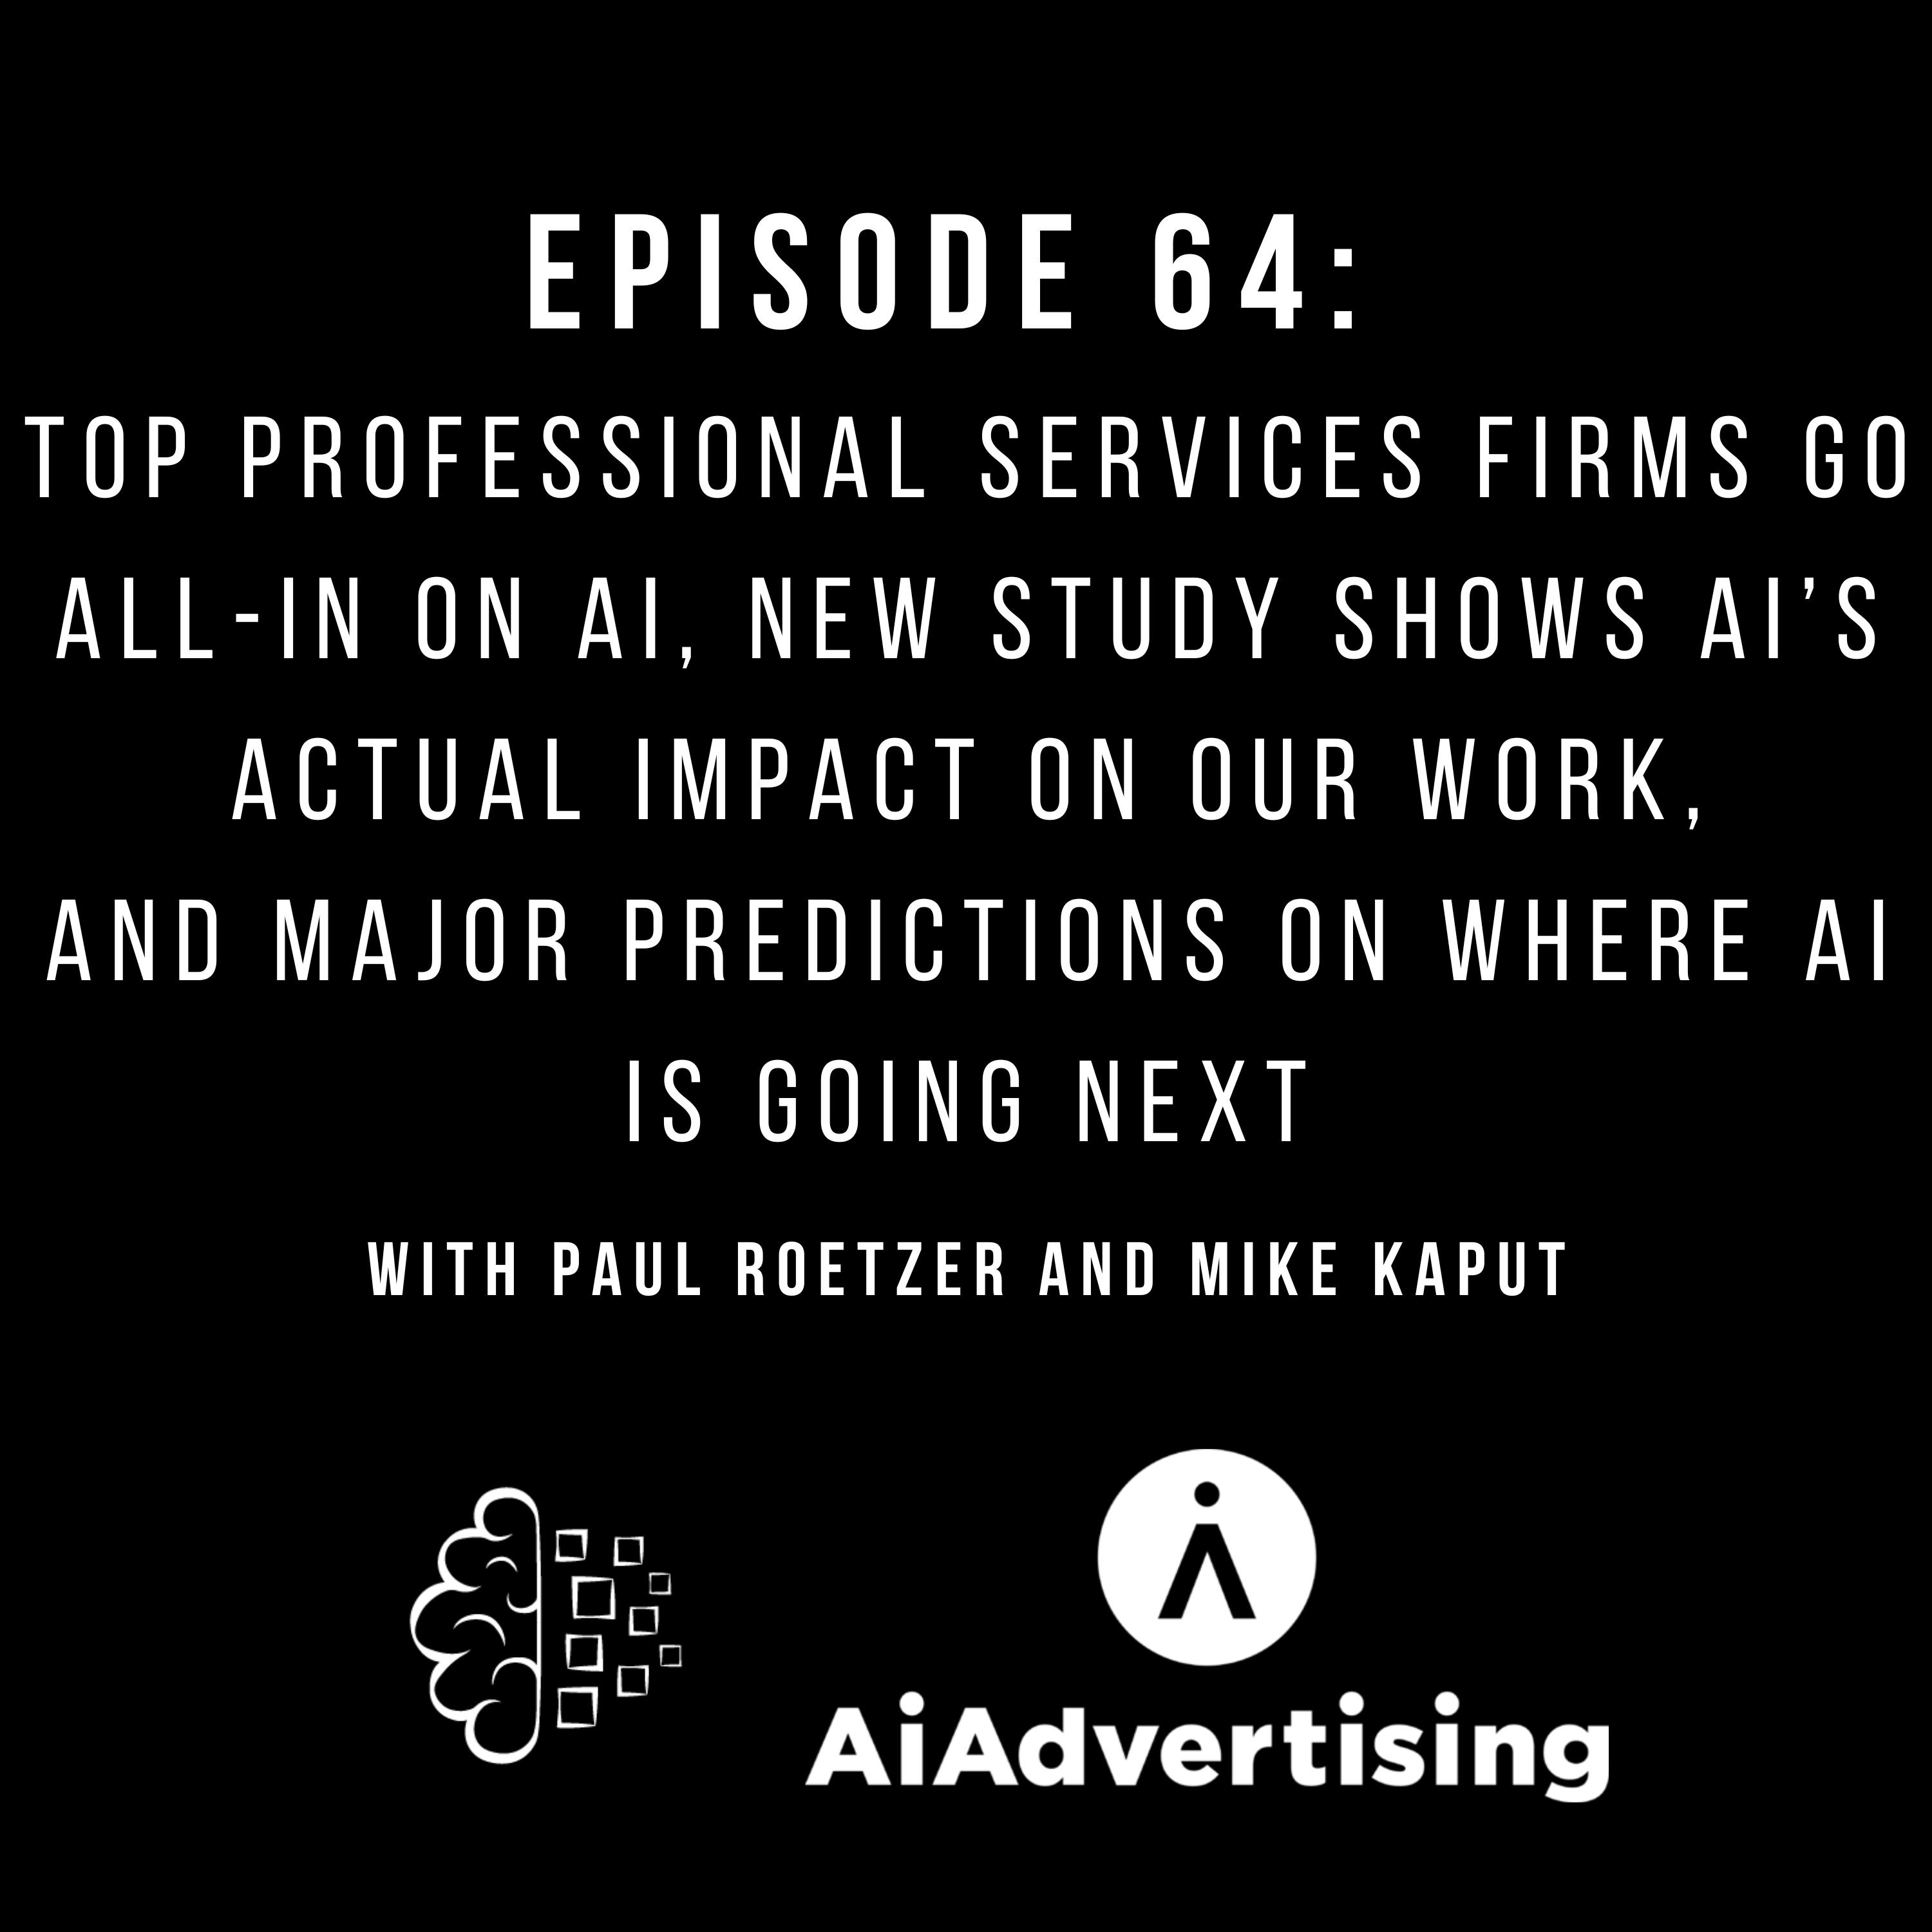 #64: Top Professional Services Firms Go All-In on AI, New Study Shows AI’s Actual Impact on Our Work, and Major Predictions on Where AI Is Going Next